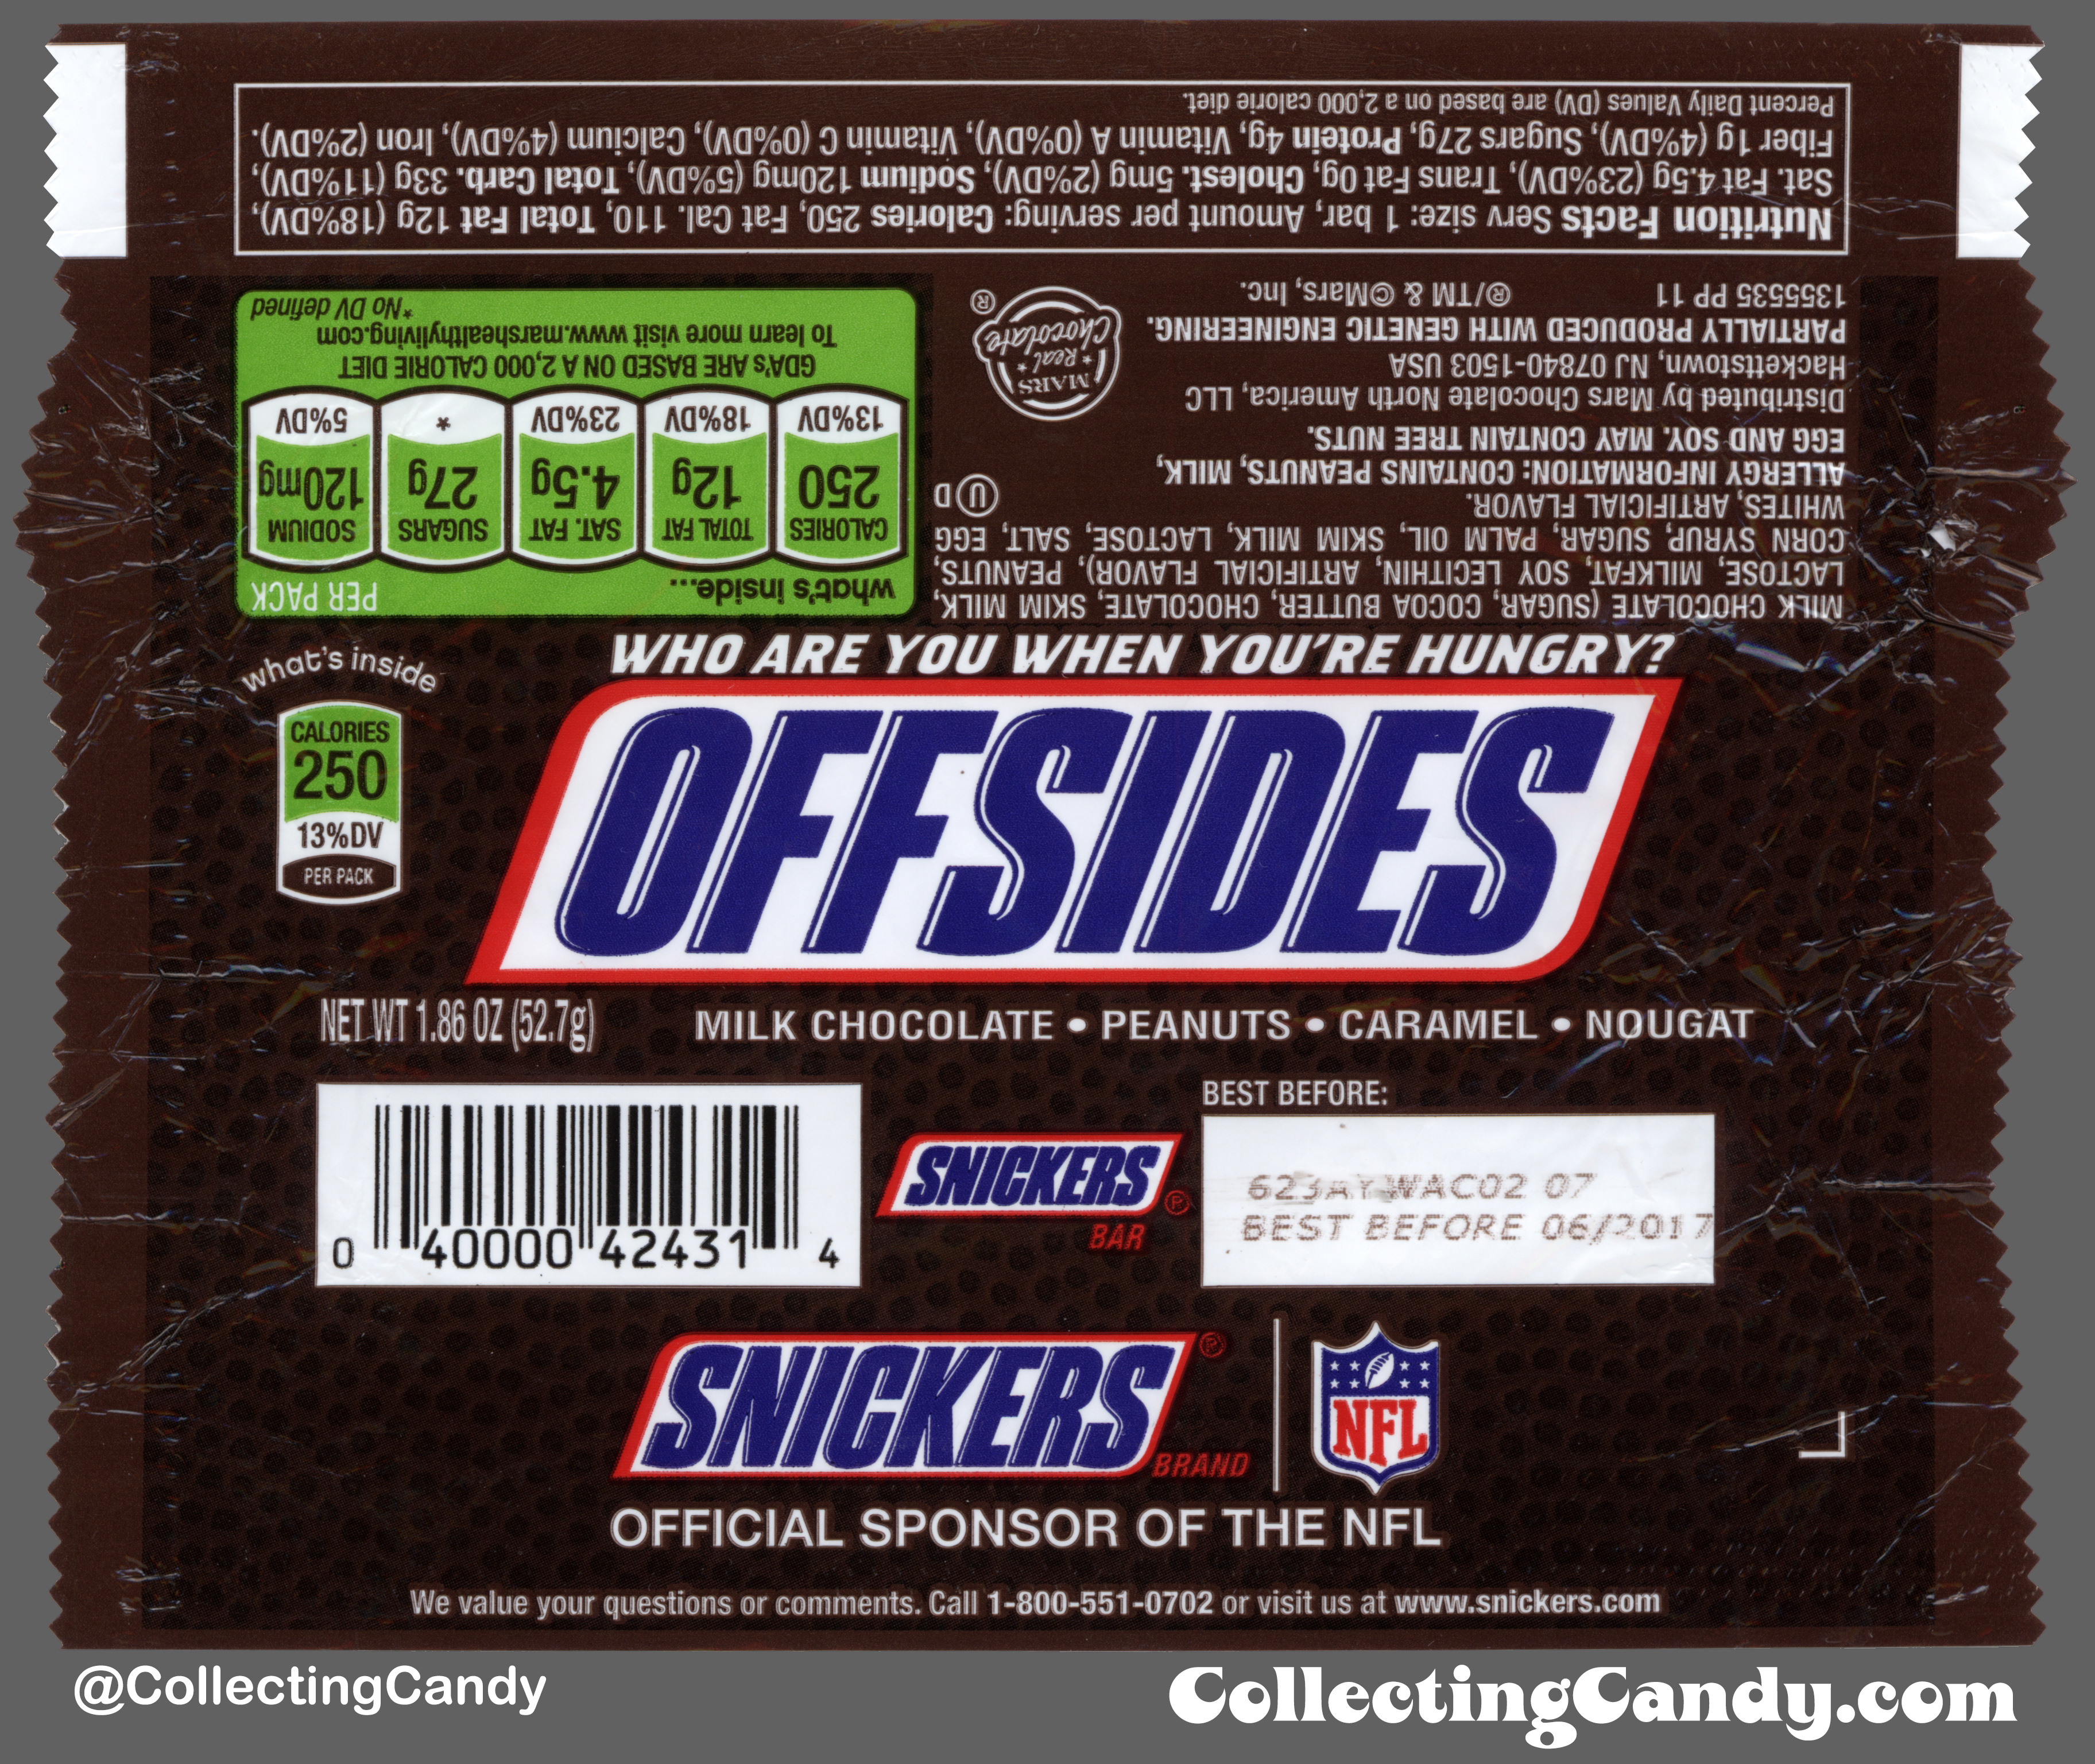 Mars - Snickers - EatASnickers NFL - Offsides - 1.86 oz chocolate candy bar wrapper - 2016